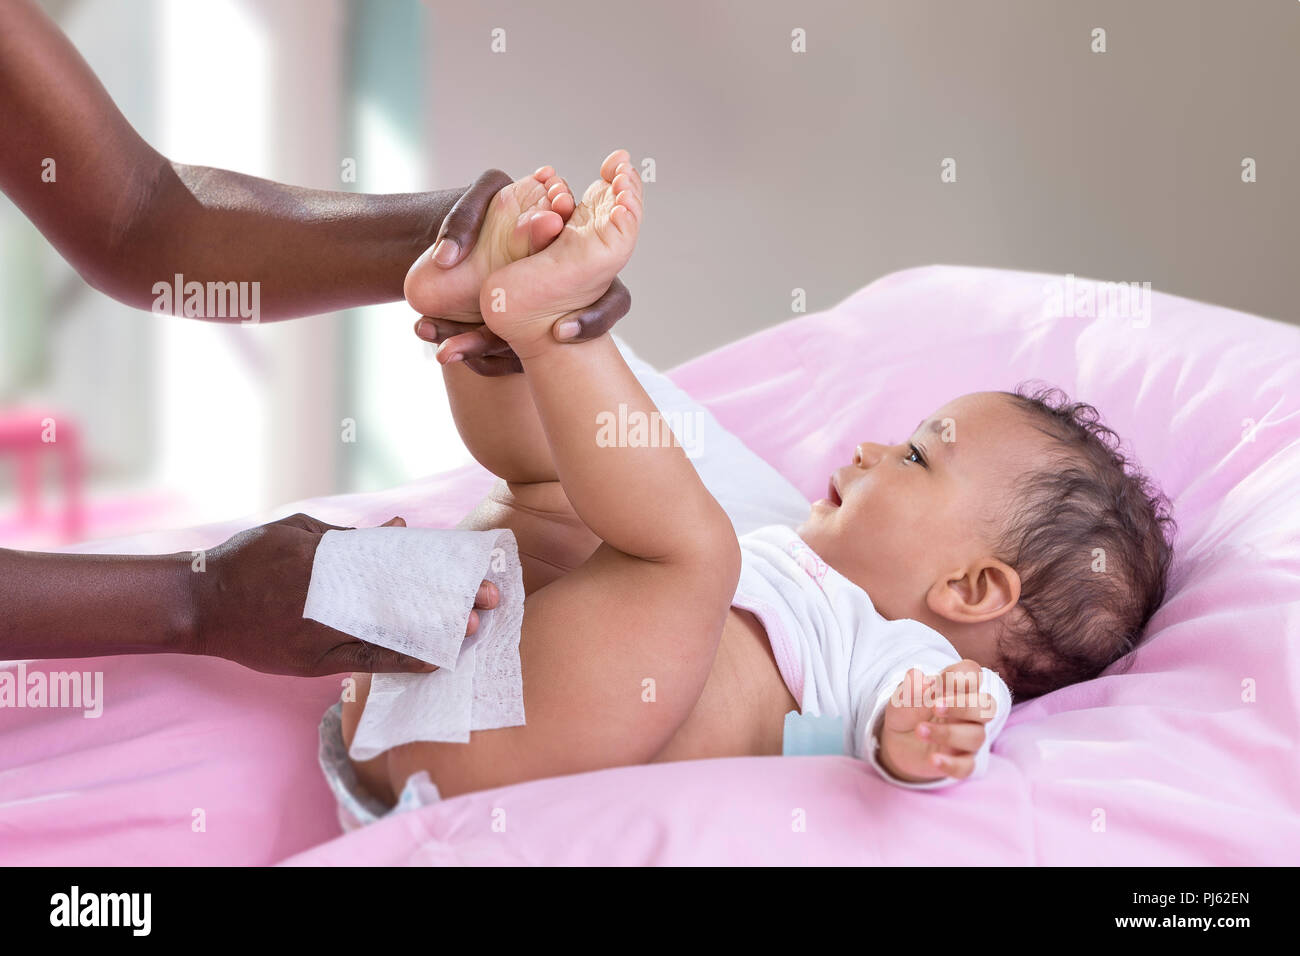 Hygiene Child. Side view portrait of a happy Afrriican, American, mother changing diaper to her baby on her bed Stock Photo